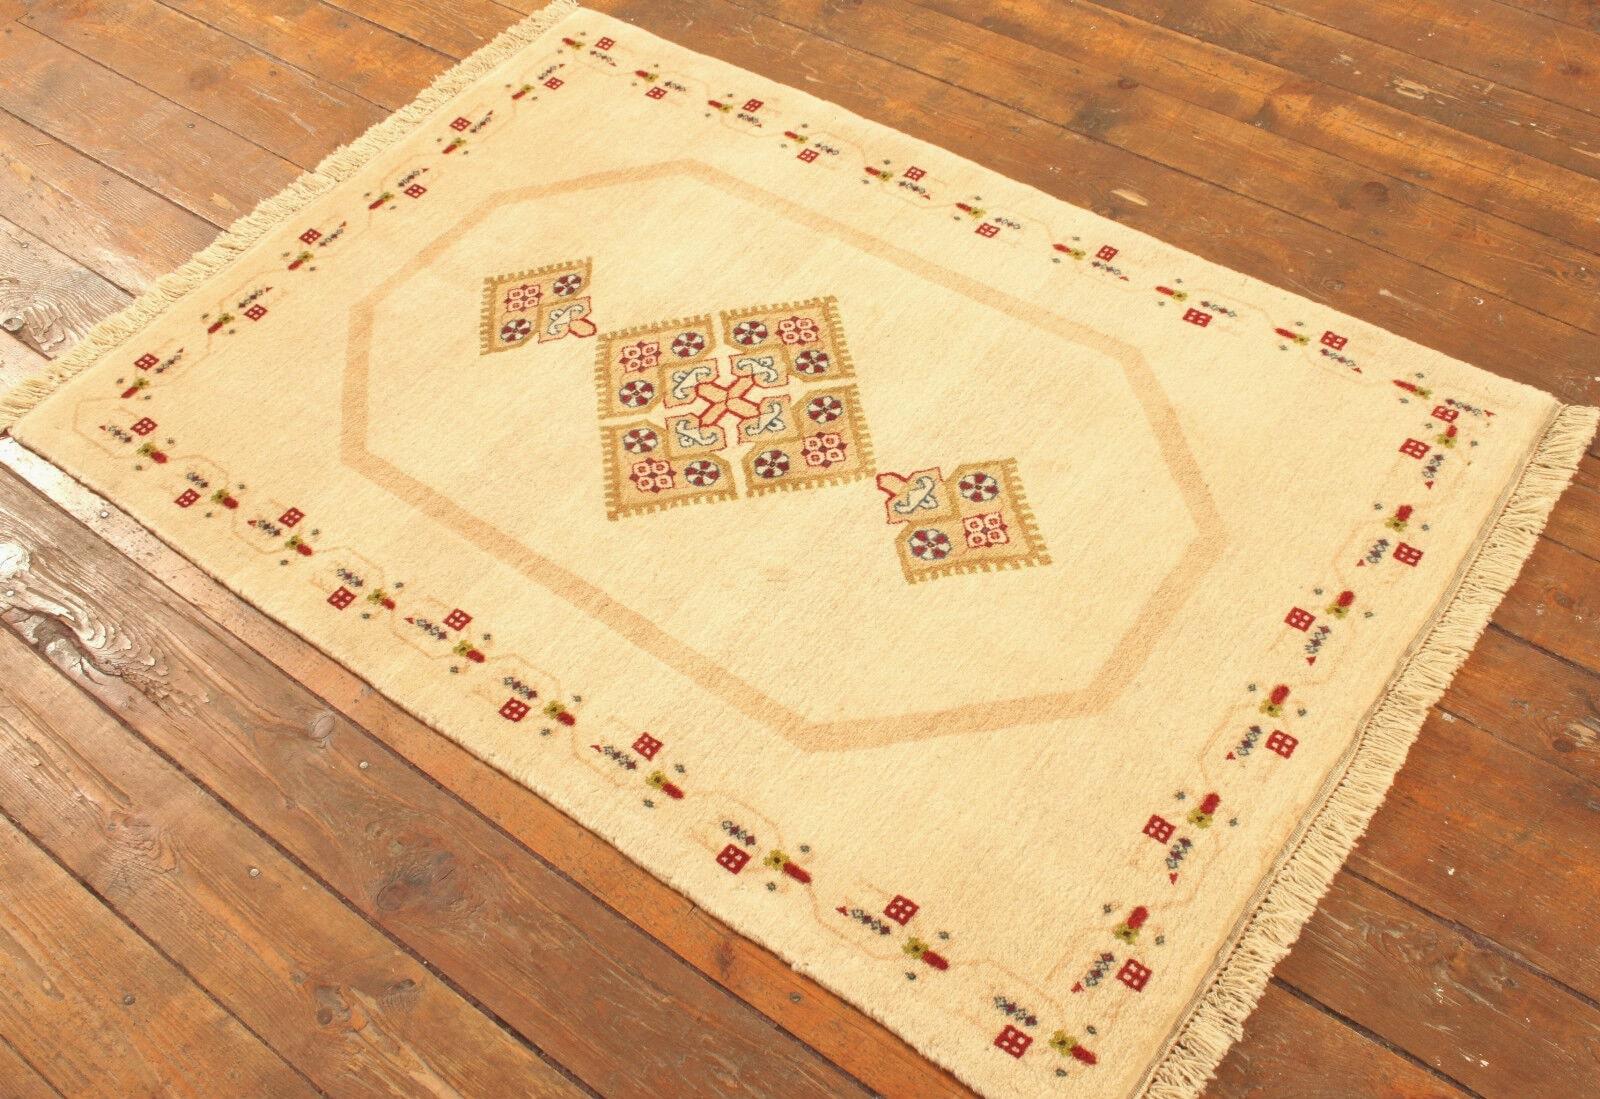 Handmade Vintage Persian Style Yalameh Rug 3.4' x 4.9', 1970s - 1T44 For Sale 1